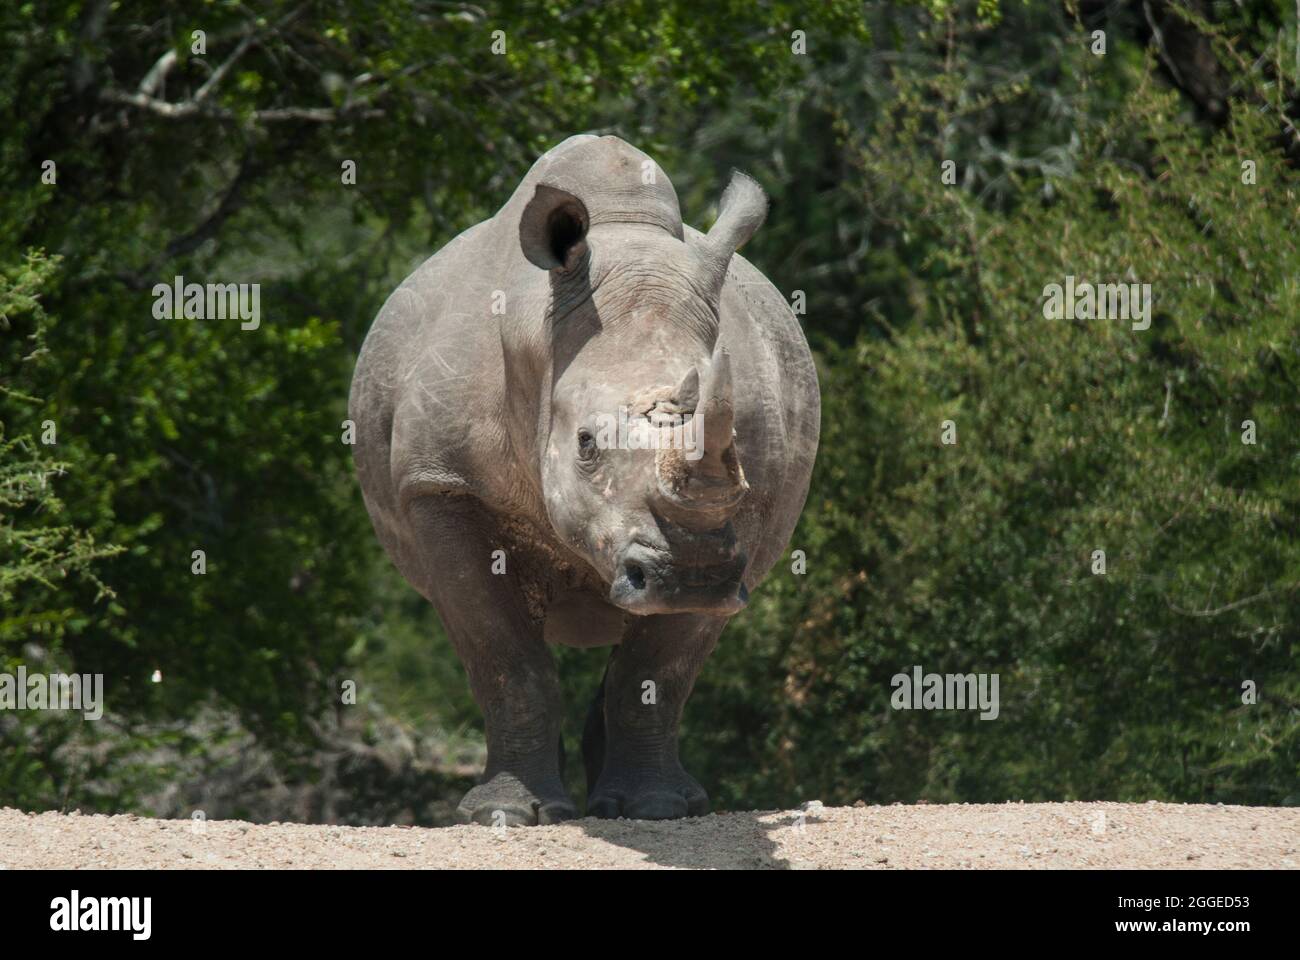 Large Southern White Rhinoceros (Ceratotherium simum simum) facing camera with green trees and bushed behind. Kruger National Park, South Africa. Stock Photo